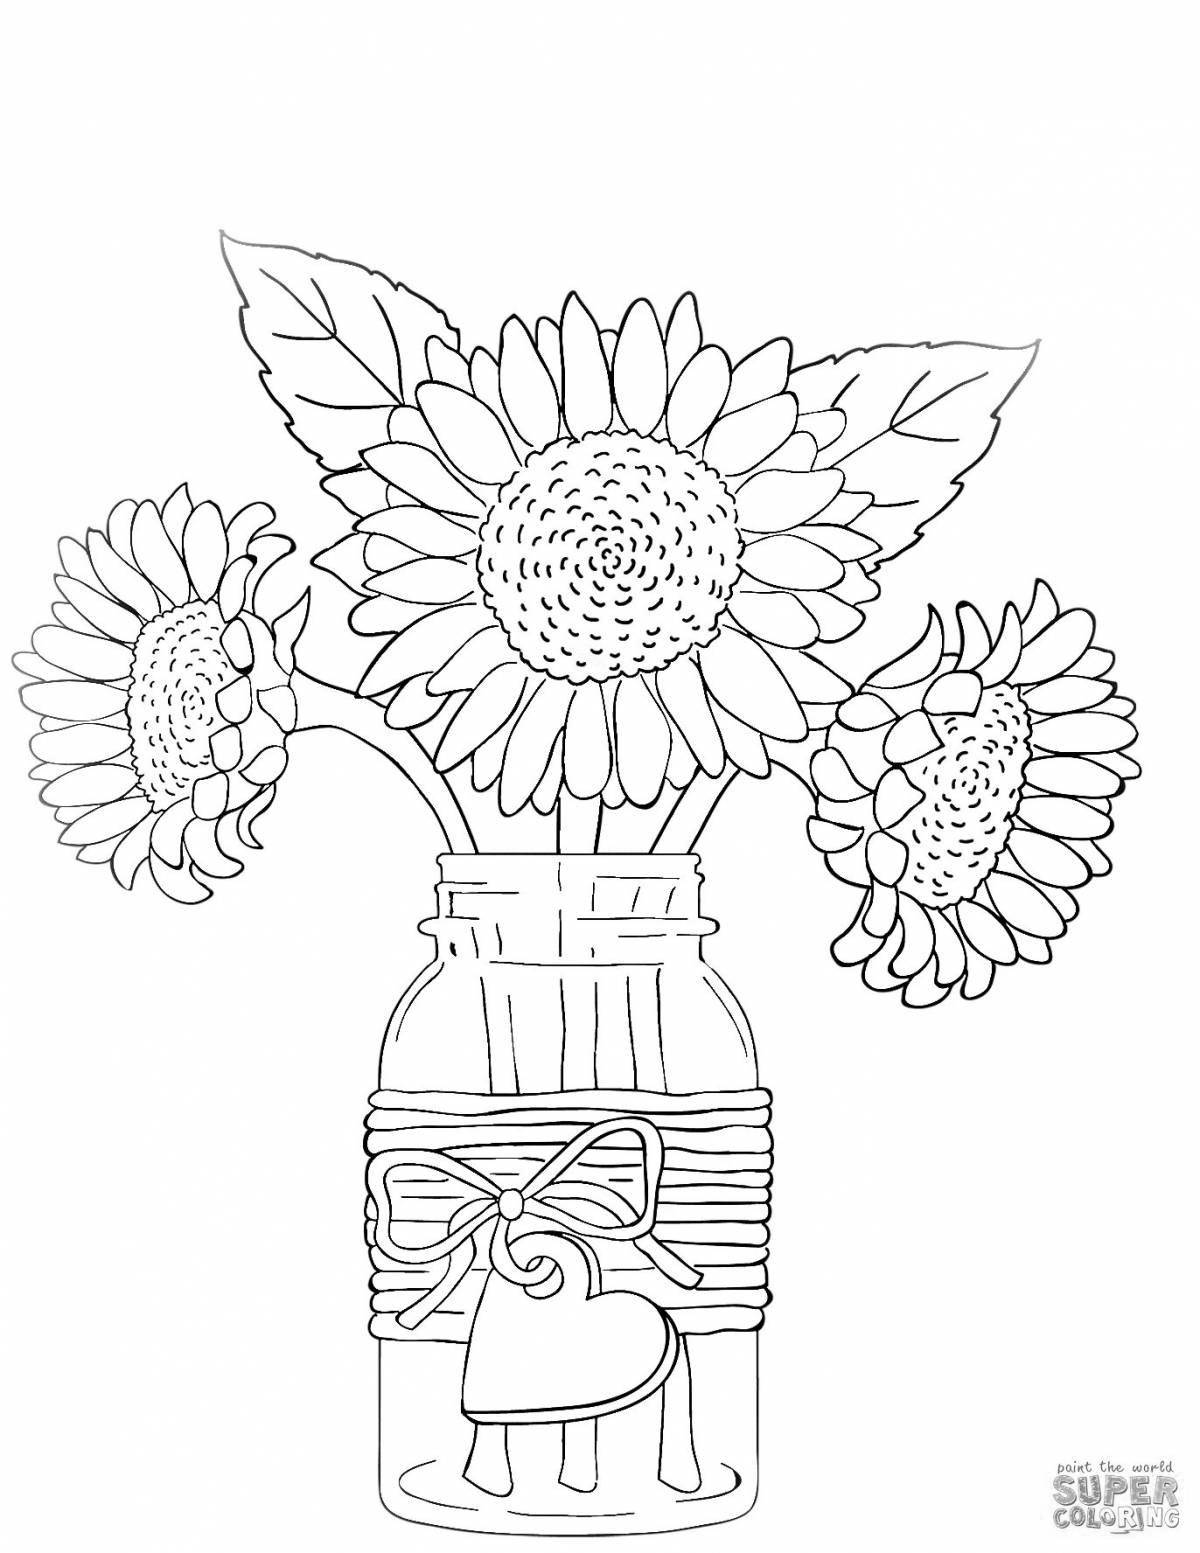 Coloring page sublime bouquet in a vase